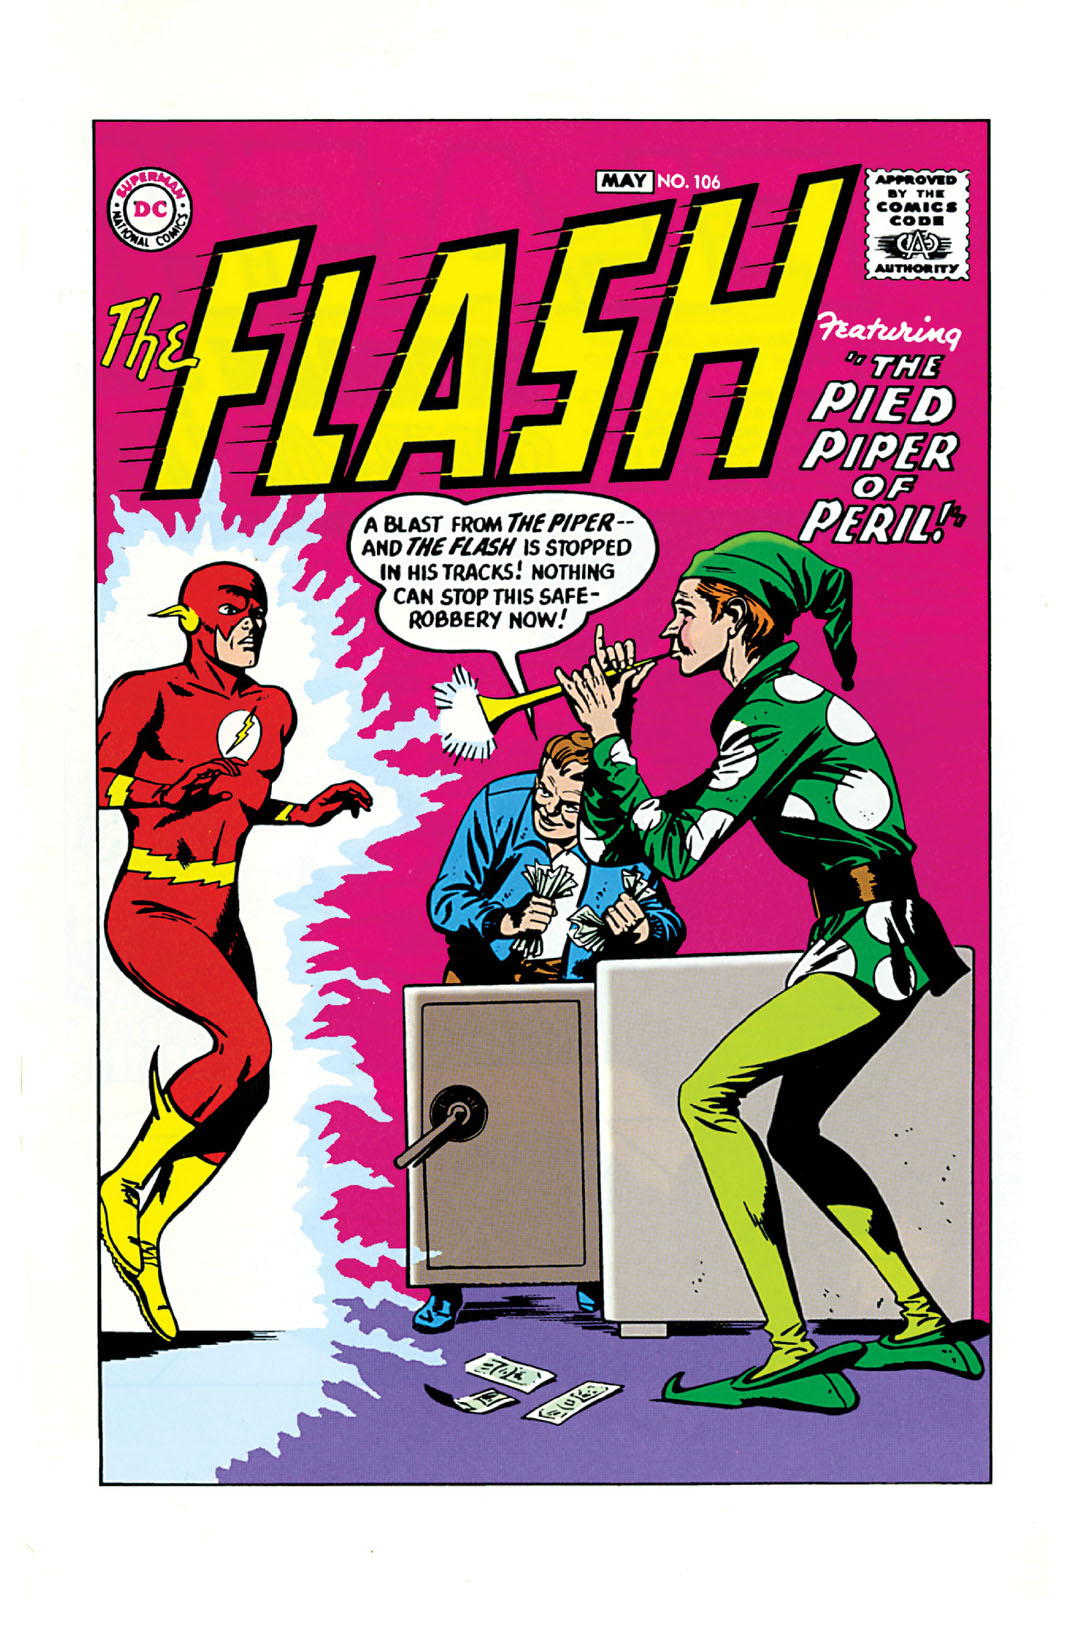 The Flash (1959-) #106 preview images